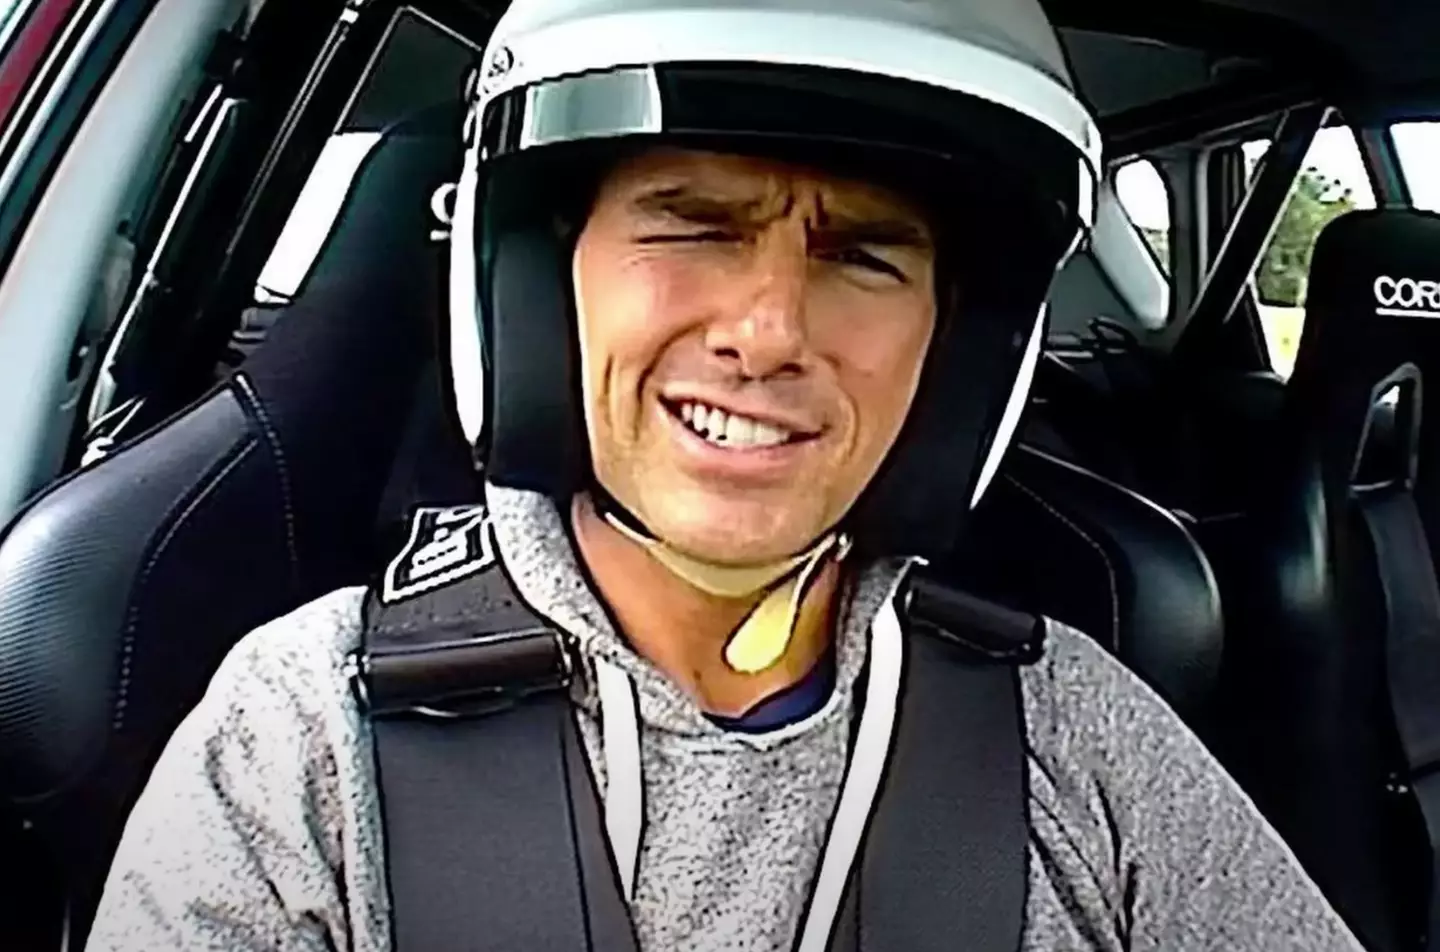 The BBC warned The Stig not to teach Tom Cruise to go too fast.